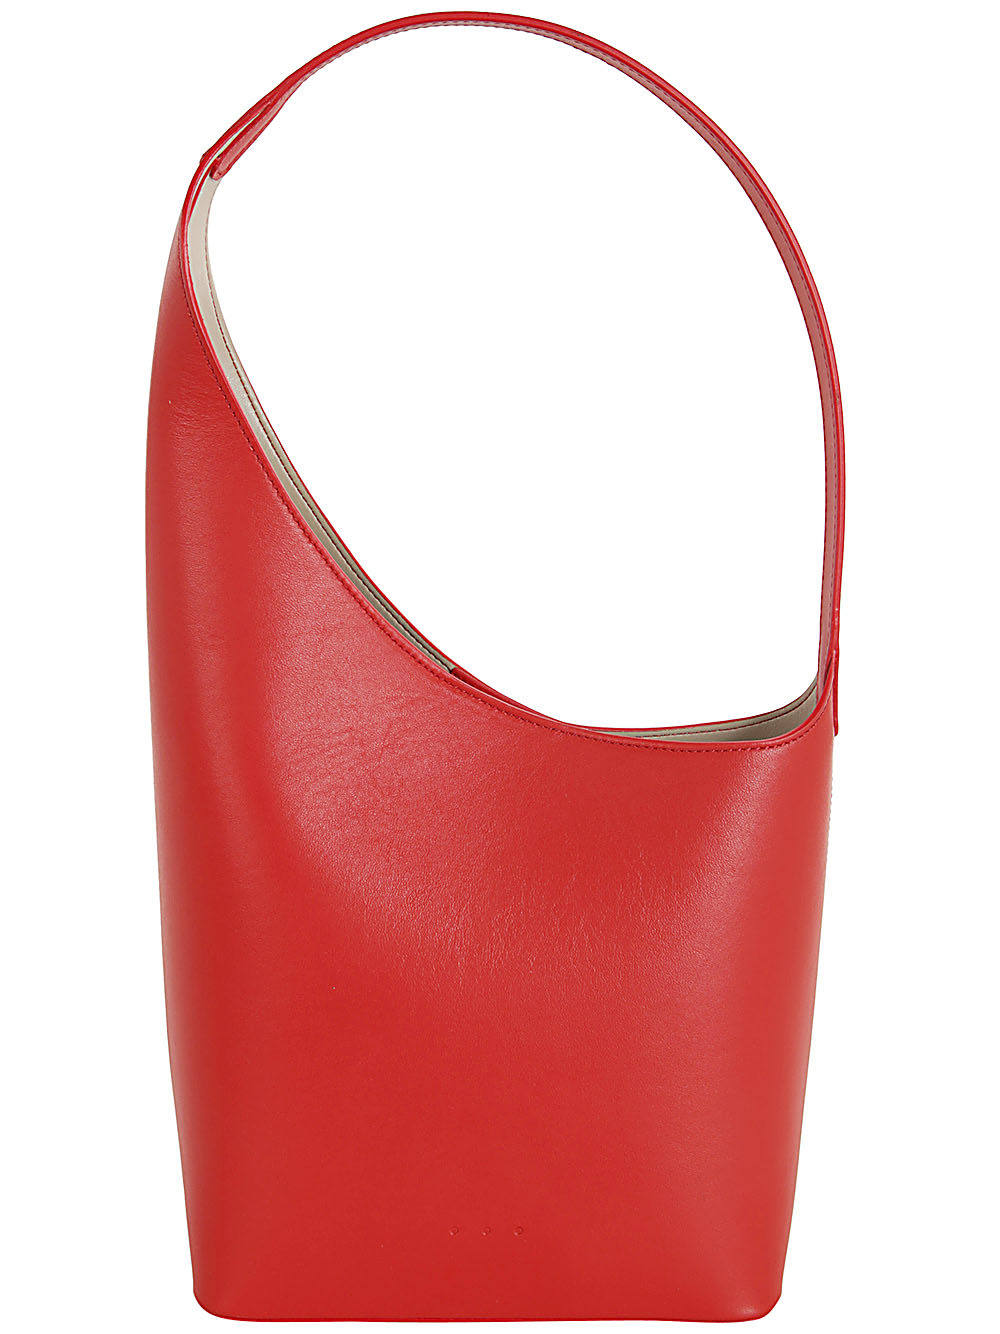 Aesther Ekme Demi Lune Tote Bag In Parrot